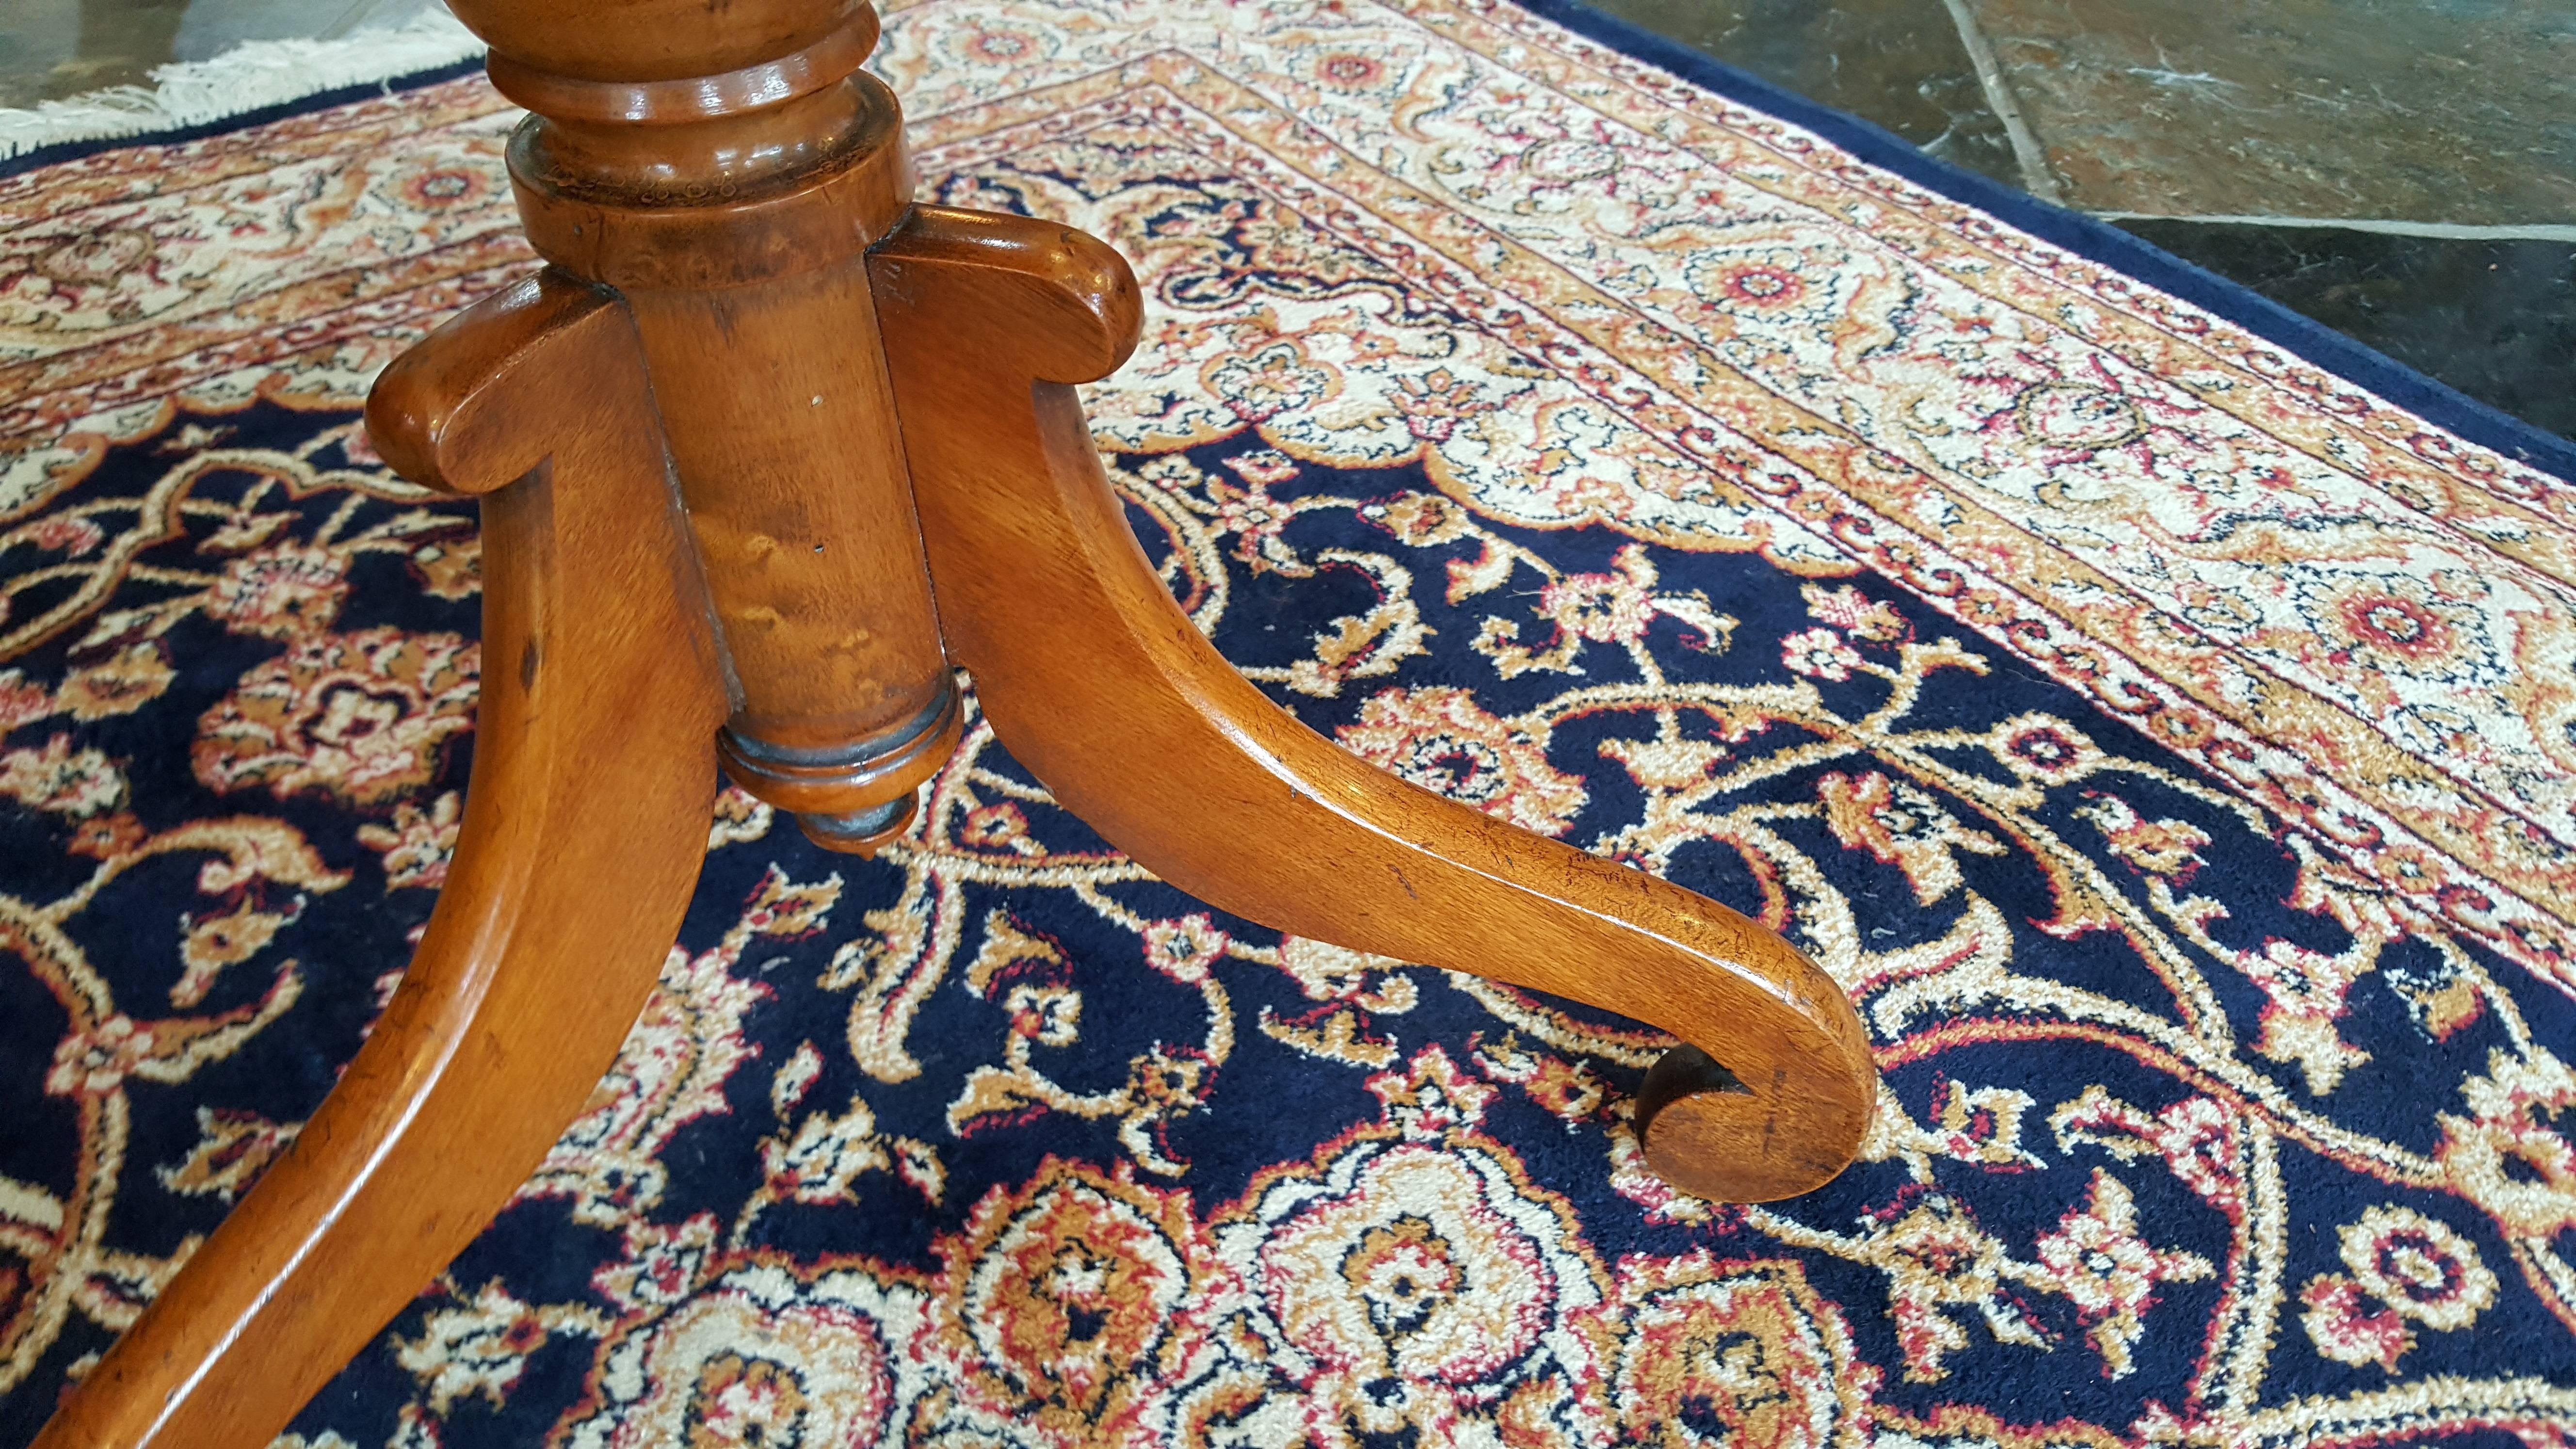 Victorian Specimen Wood Occasional Table In Excellent Condition For Sale In Altrincham, Cheshire